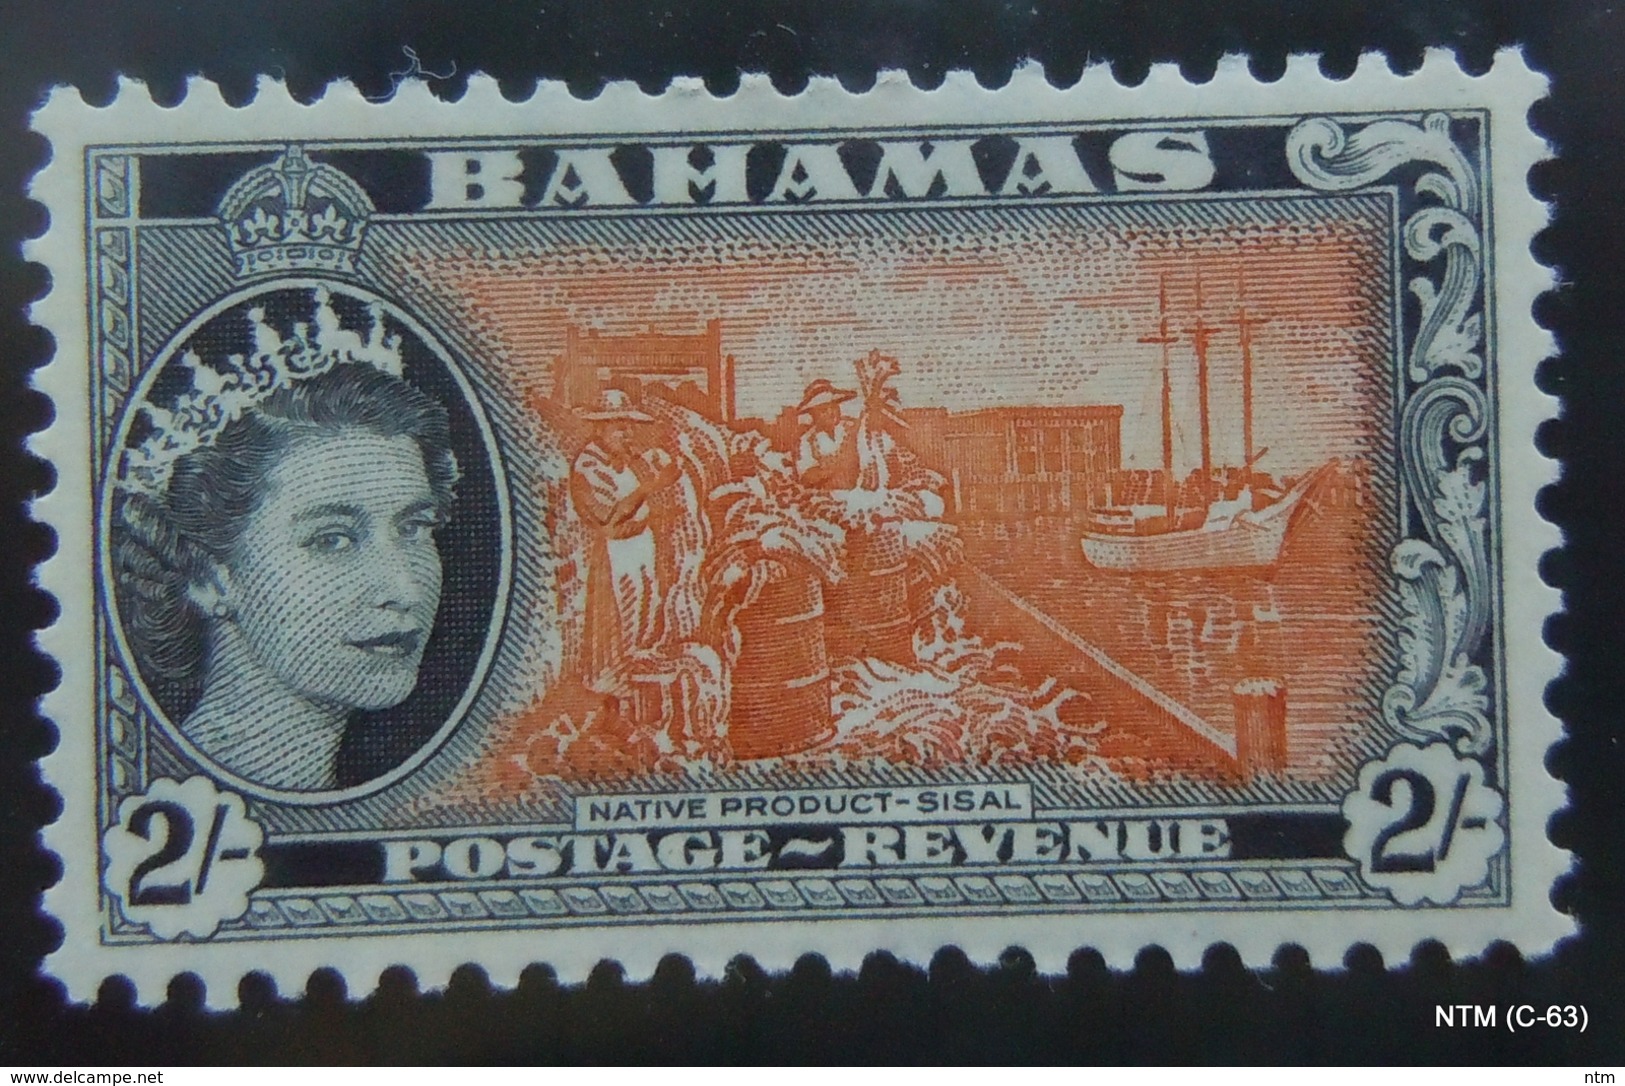 BAHAMAS 1954 Queen Elizabeth II Stamps: 1S. & 2S. SG 211-212. Scott 168-169. MH - 1859-1963 Colonia Británica